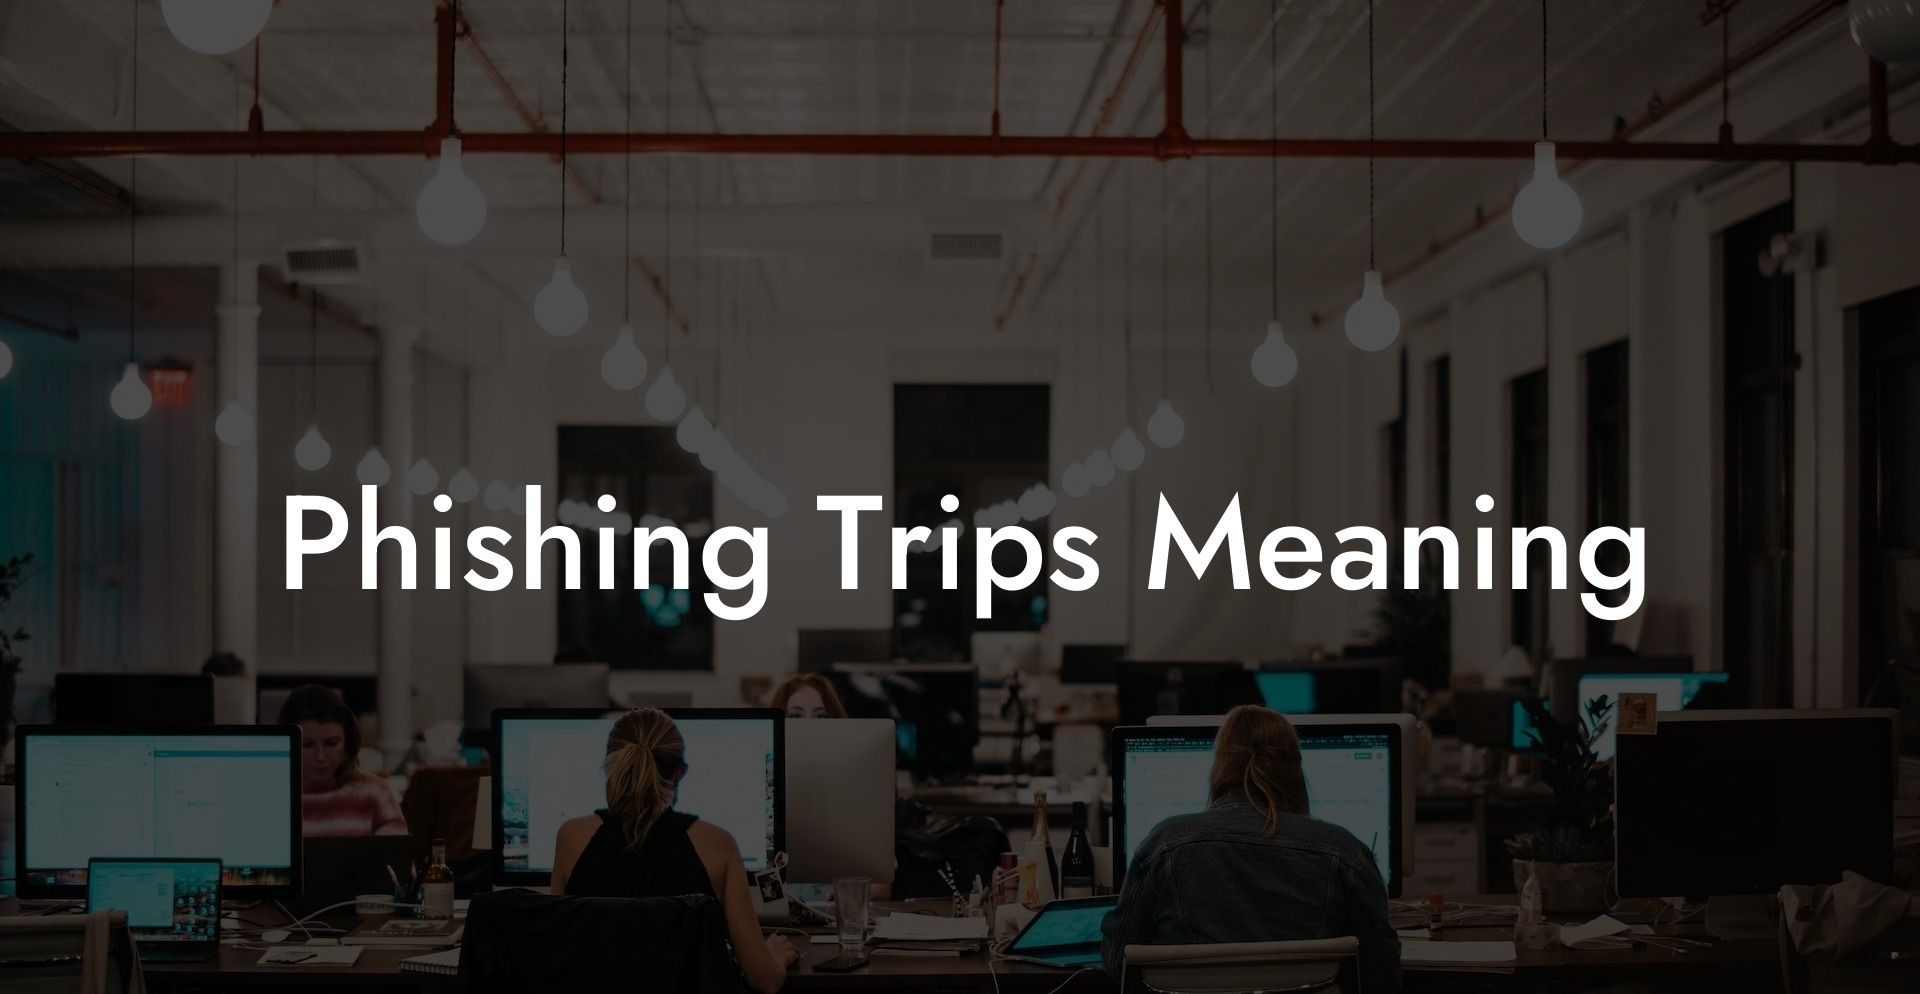 Phishing Trips Meaning